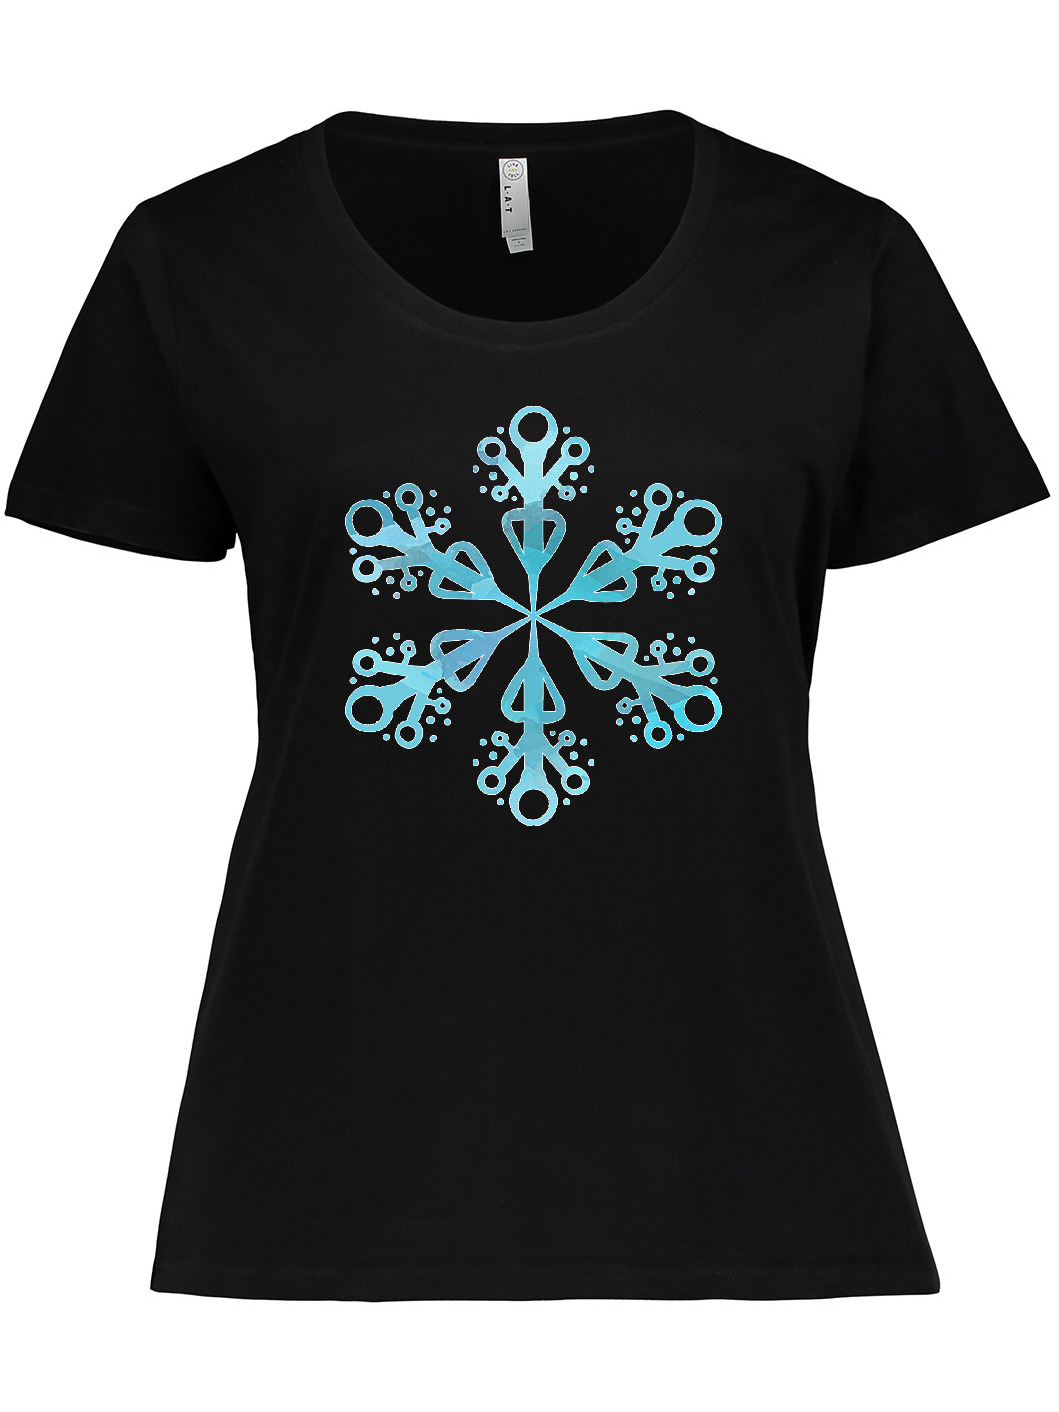 Inktastic Icy Blue Winter Snowflake Women's Plus Size T-Shirt - image 1 of 4